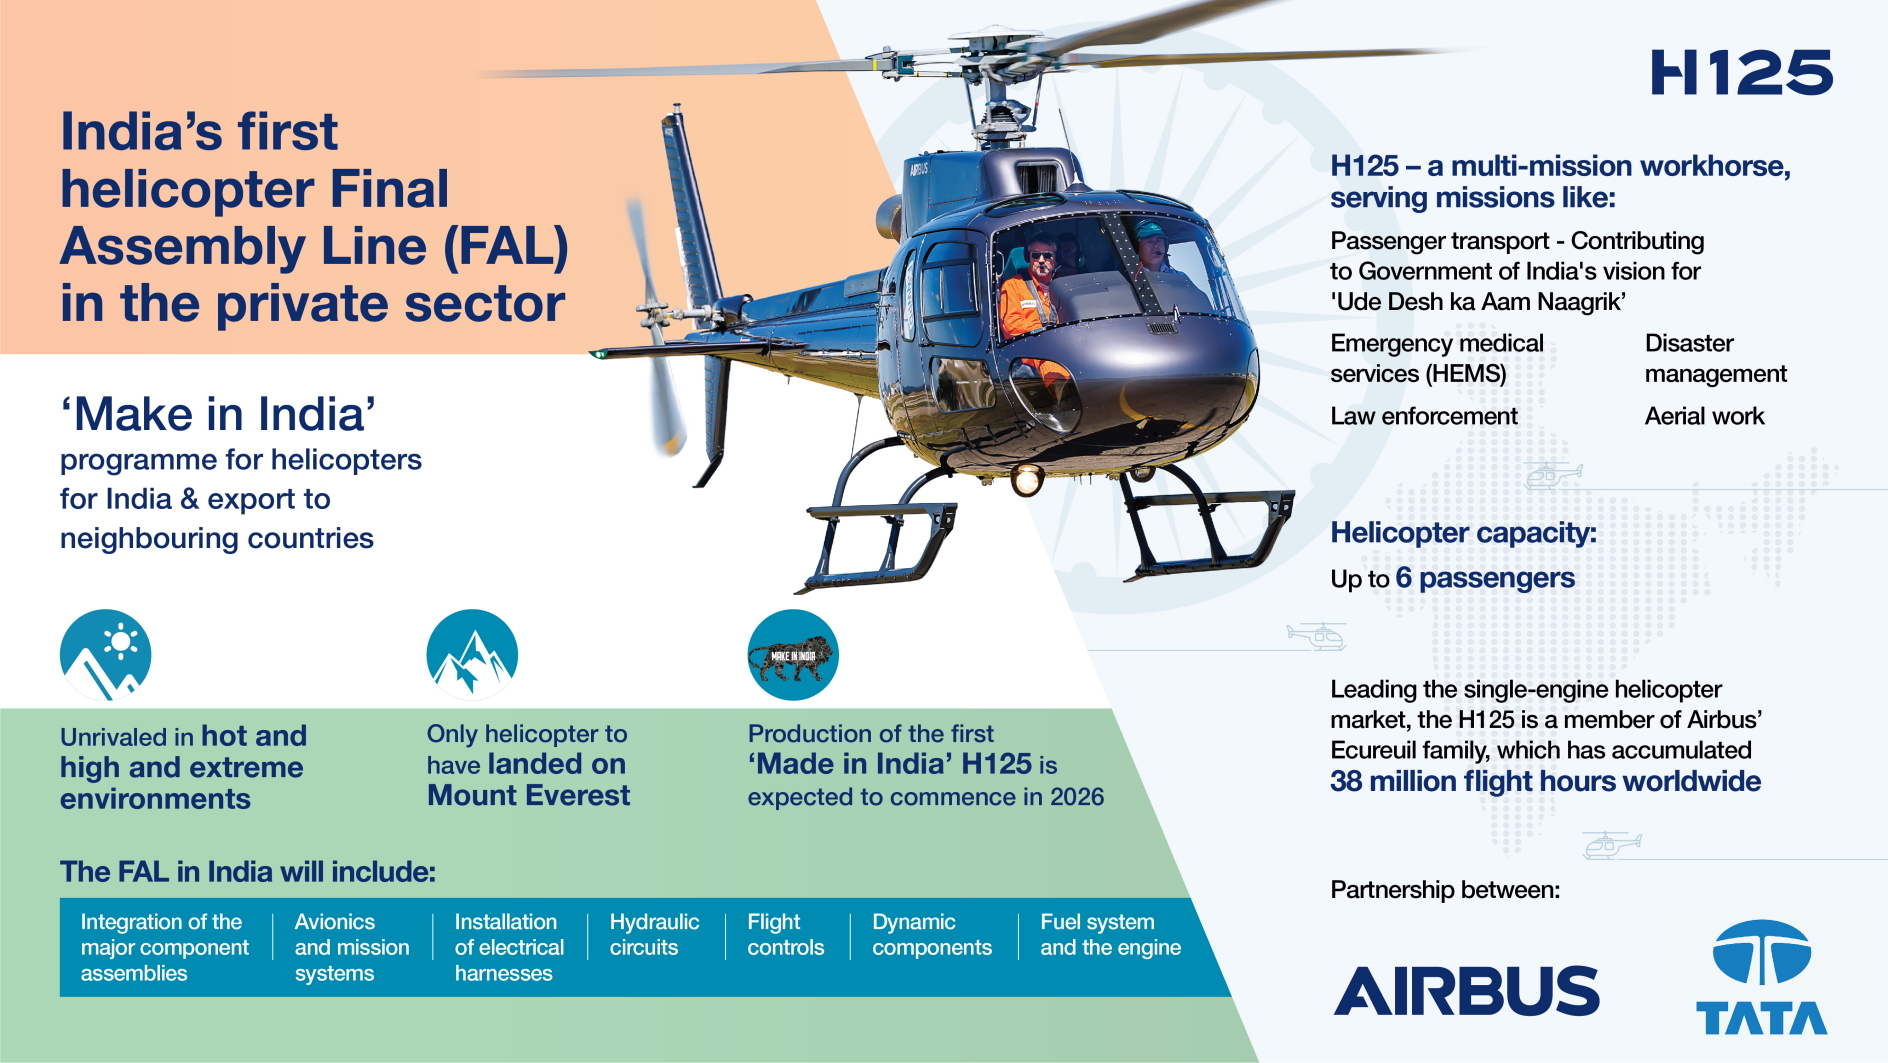 Airbus Helicopters has partnered with the Tata Group to establish an H125 Final Assembly Line (FAL) in India. Click to enlarge.